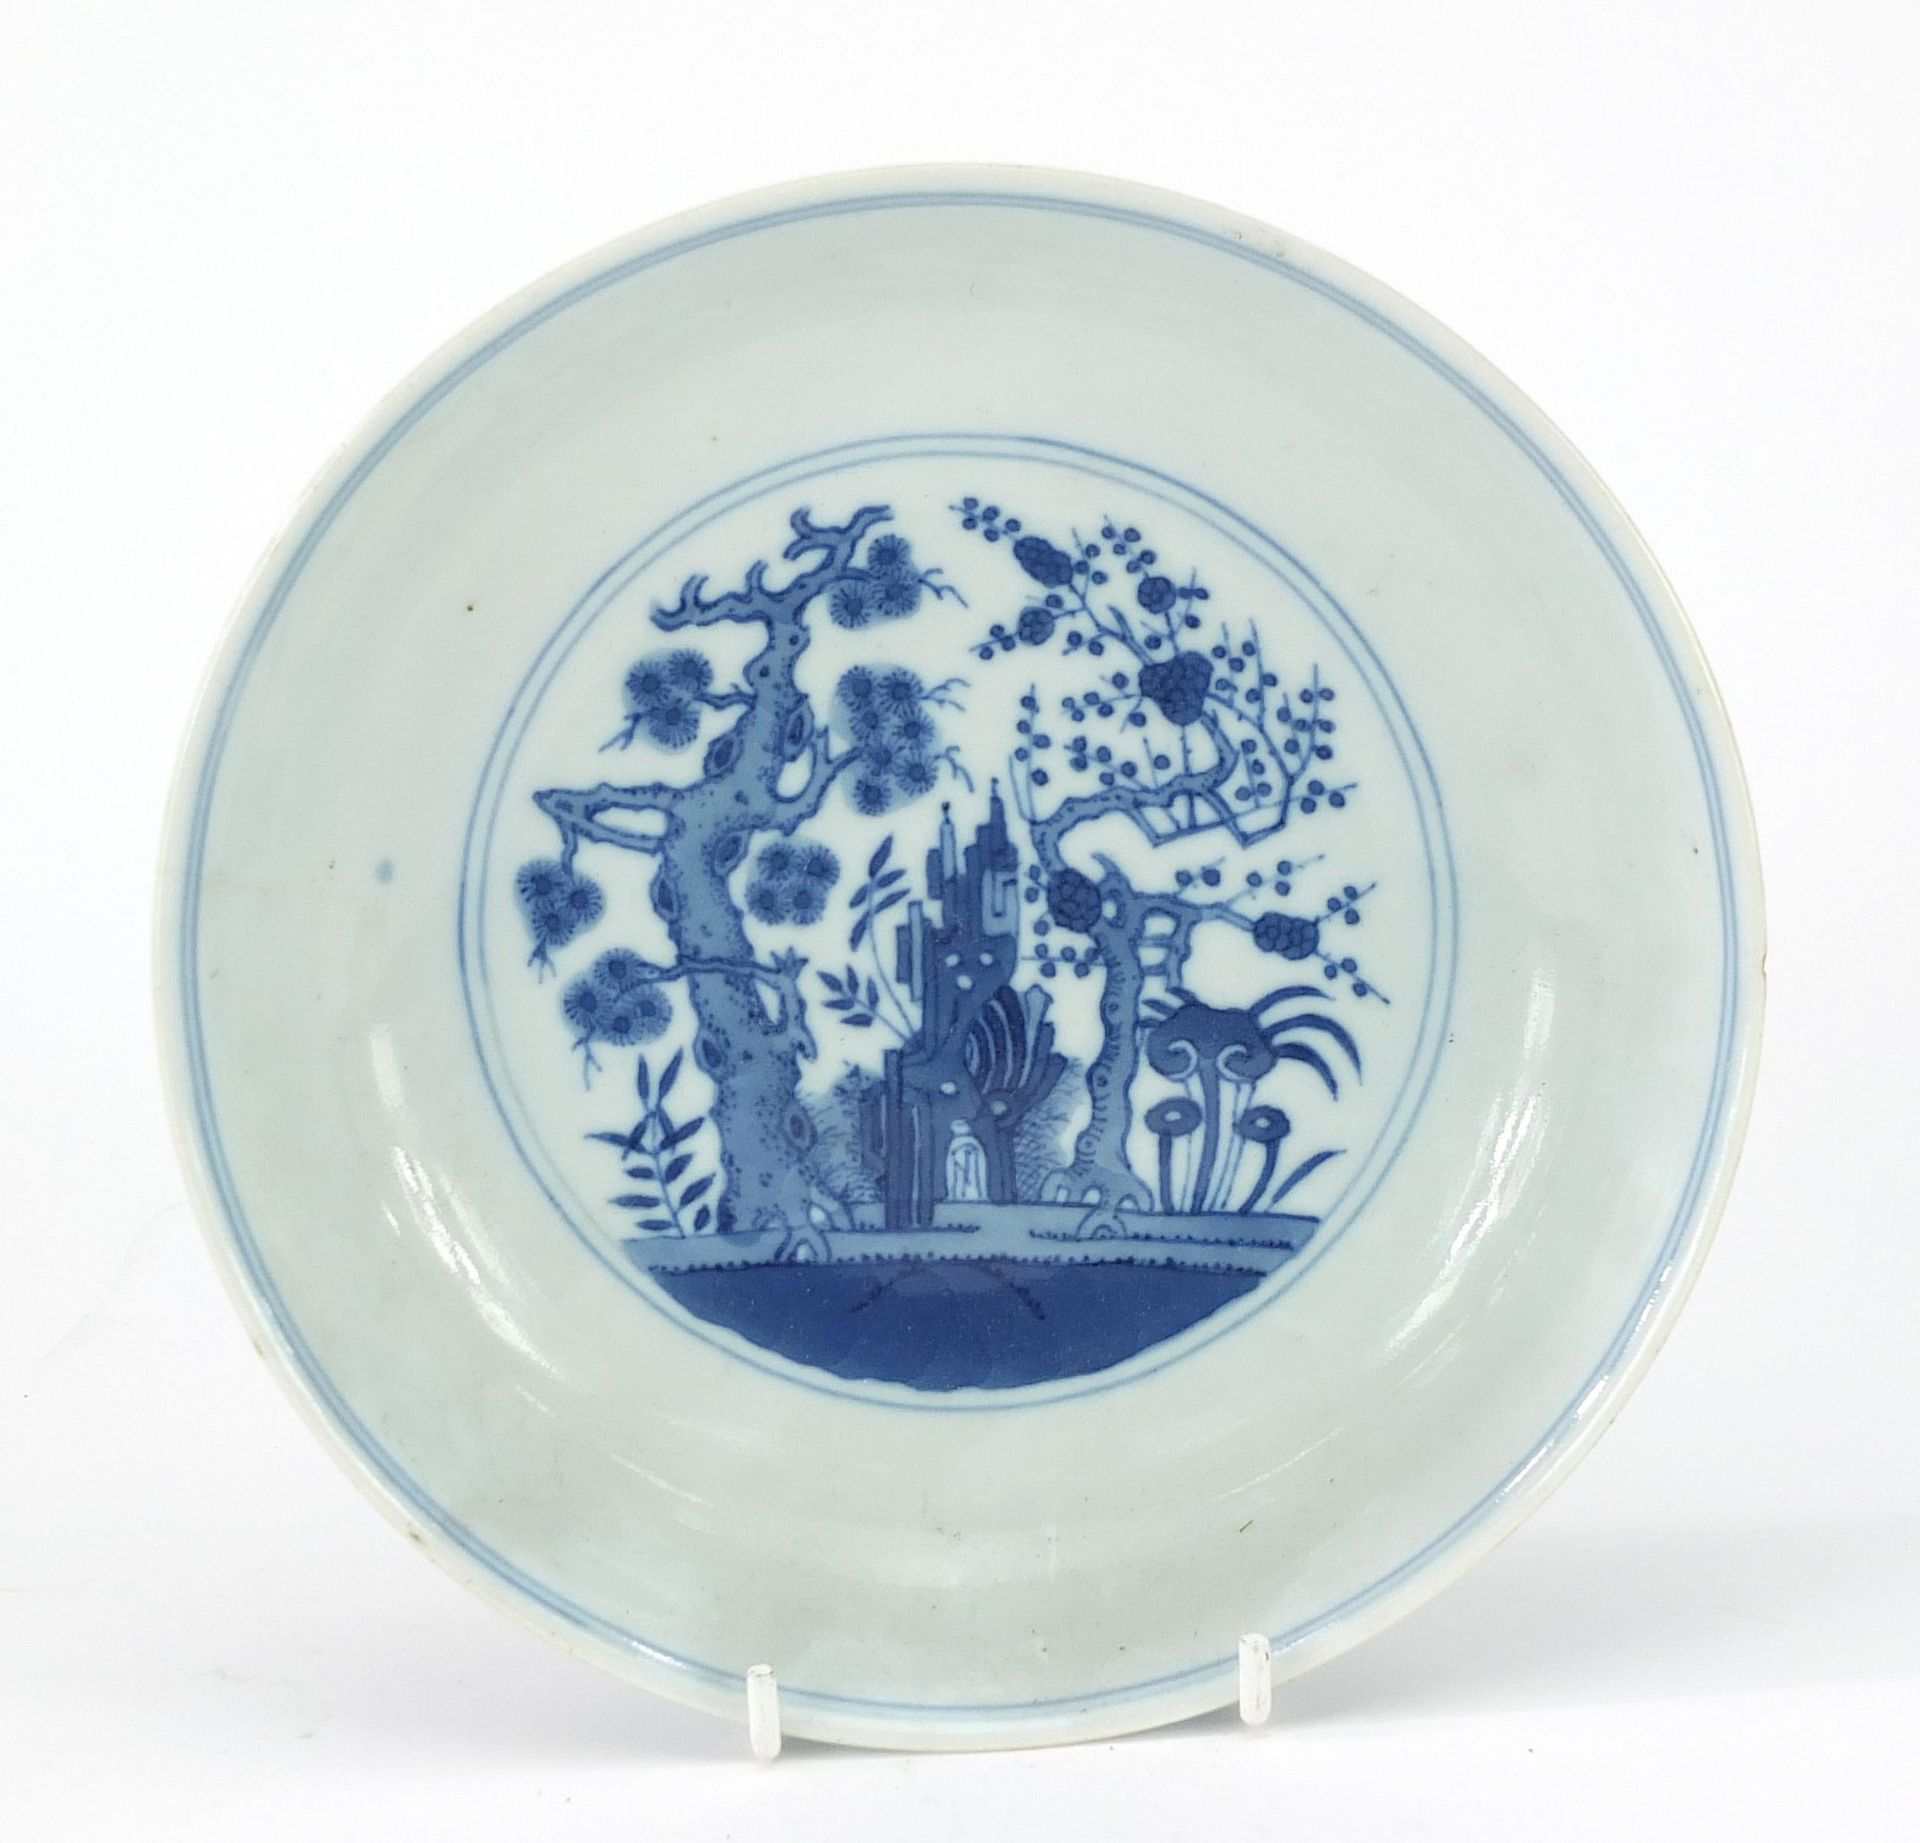 Chinese blue and white porcelain dish hand painted with flowers and figures in a palace setting, six